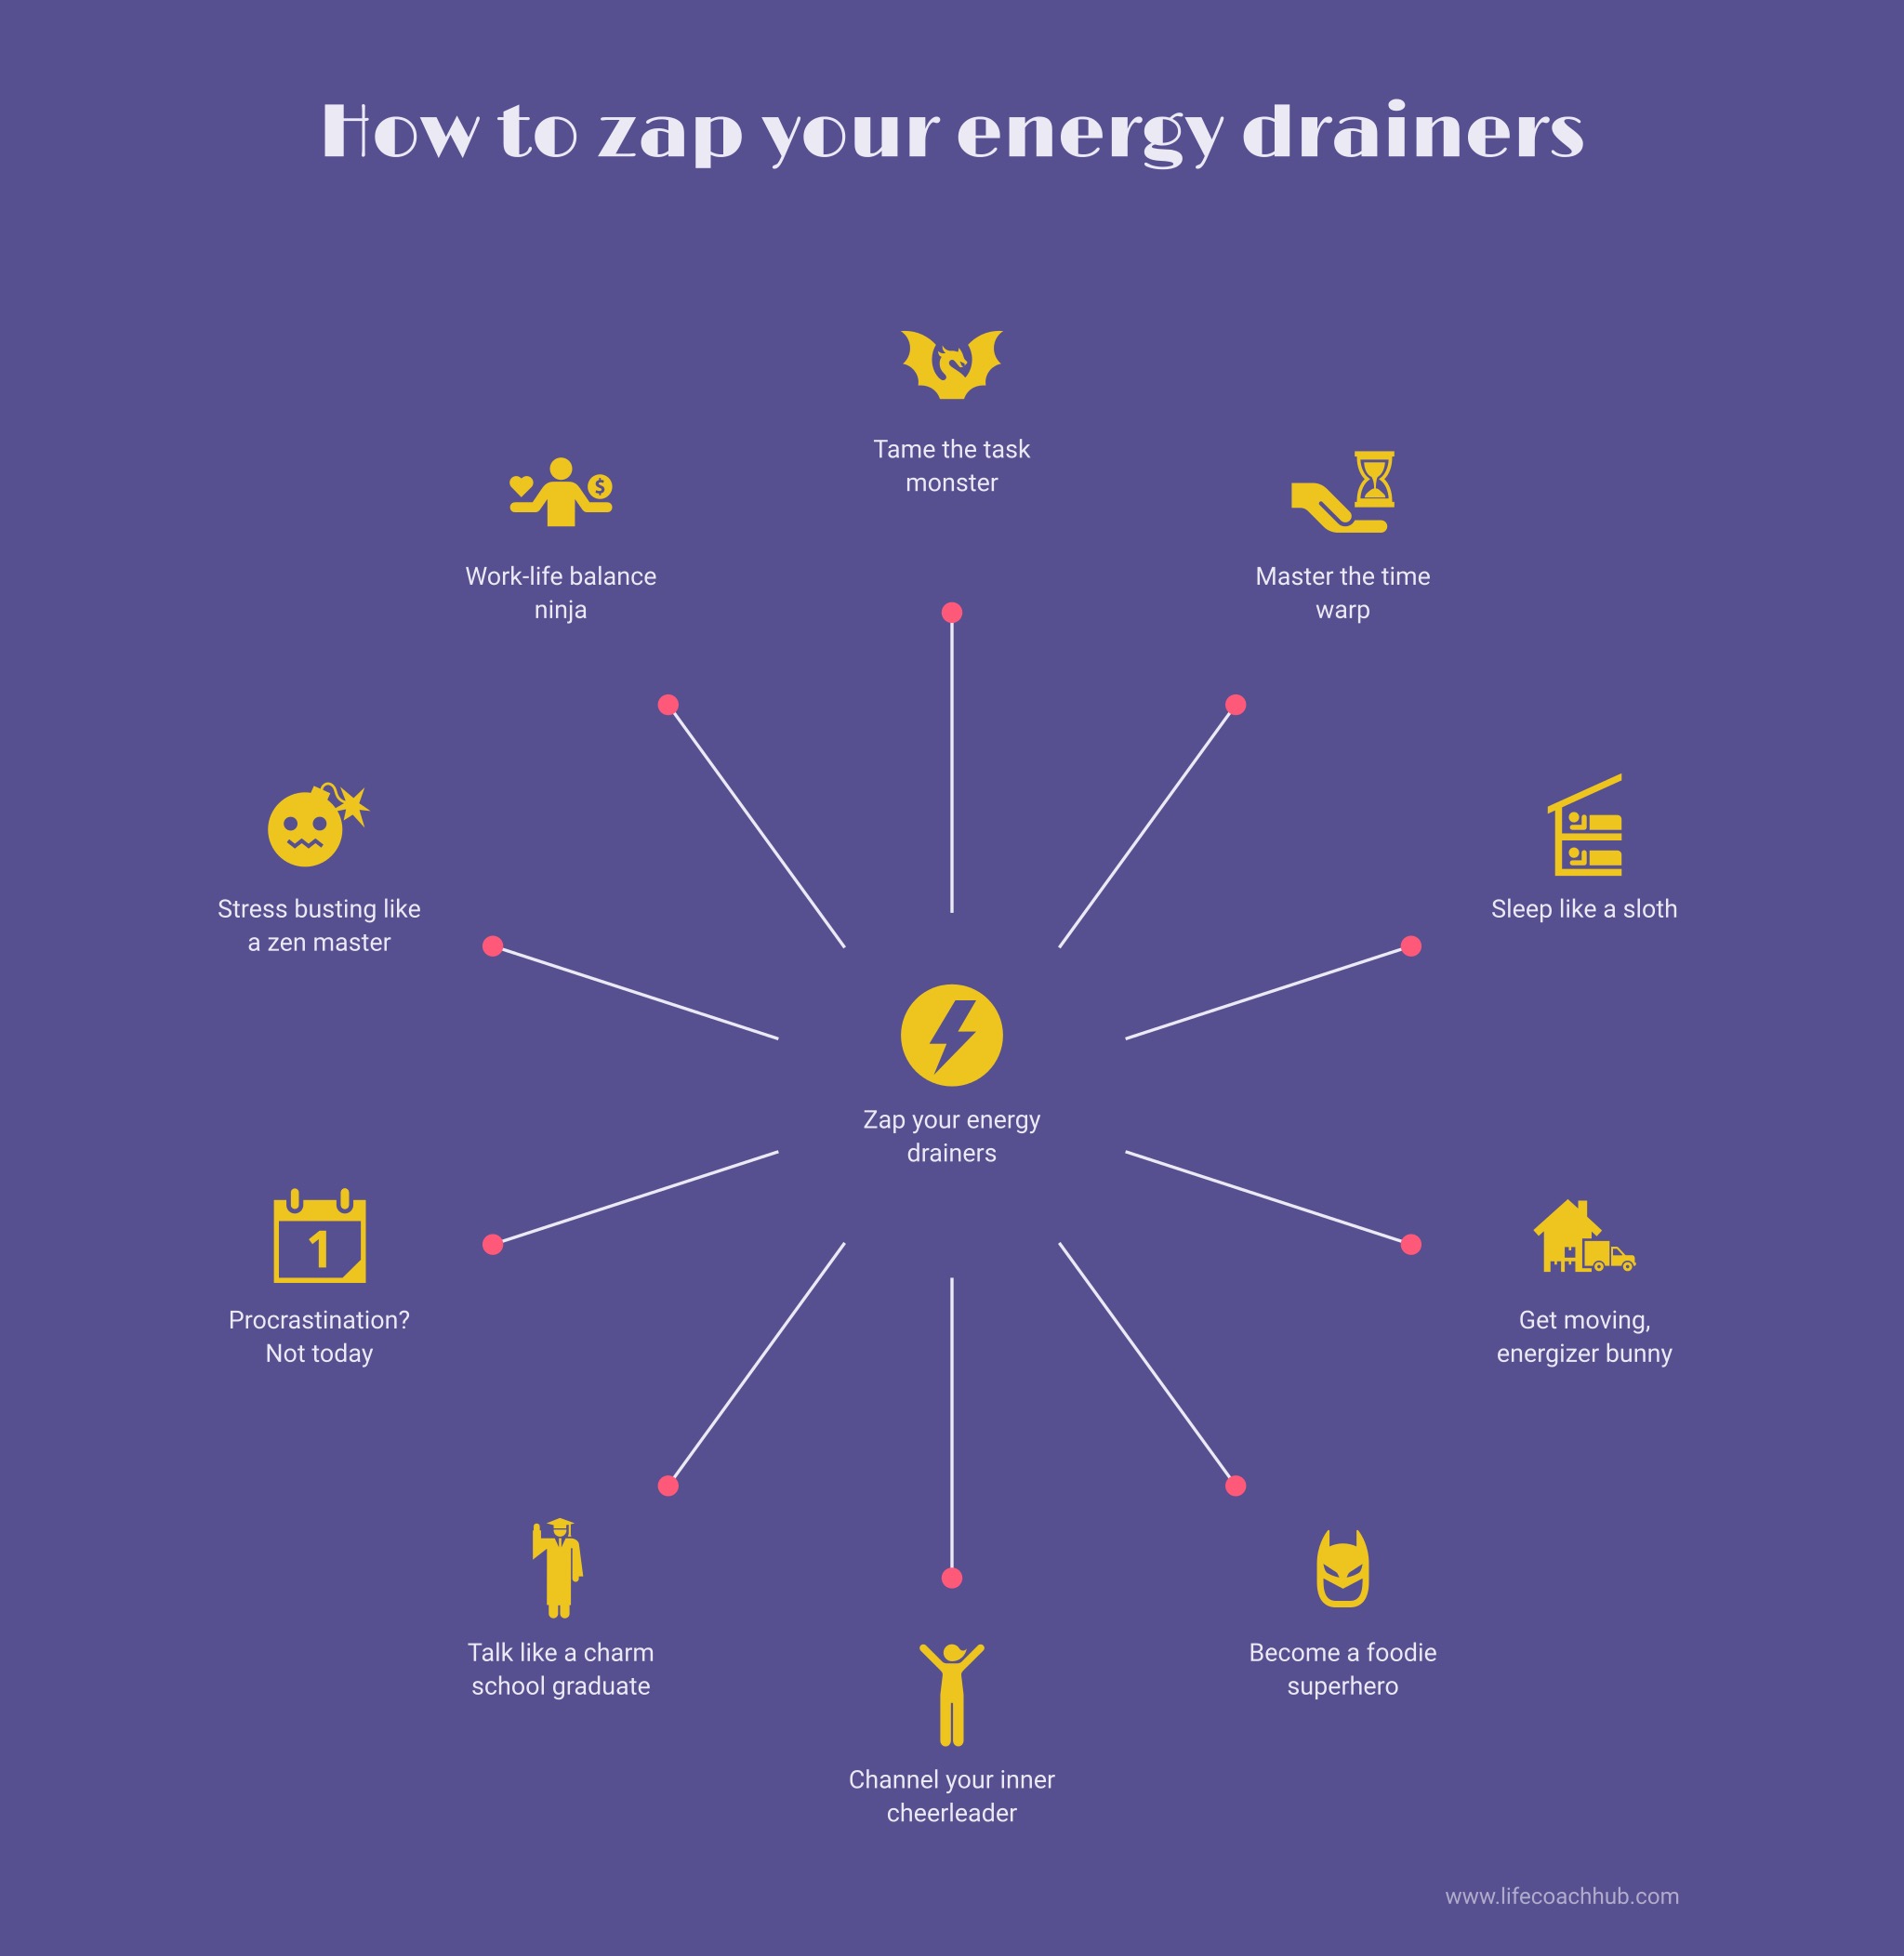 How to zap your energy drainers